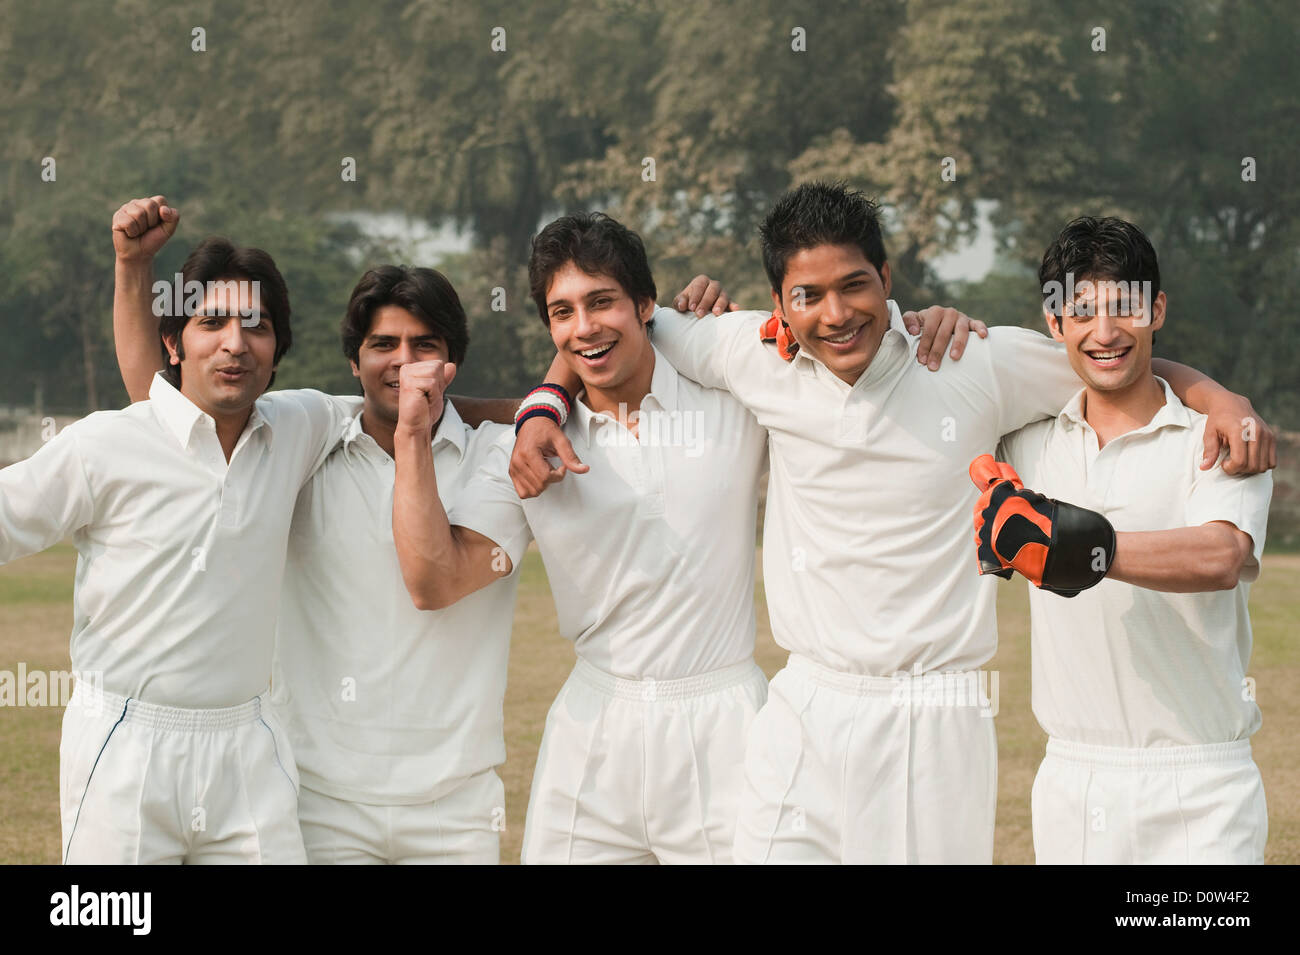 Cricket players celebrating their success Stock Photo